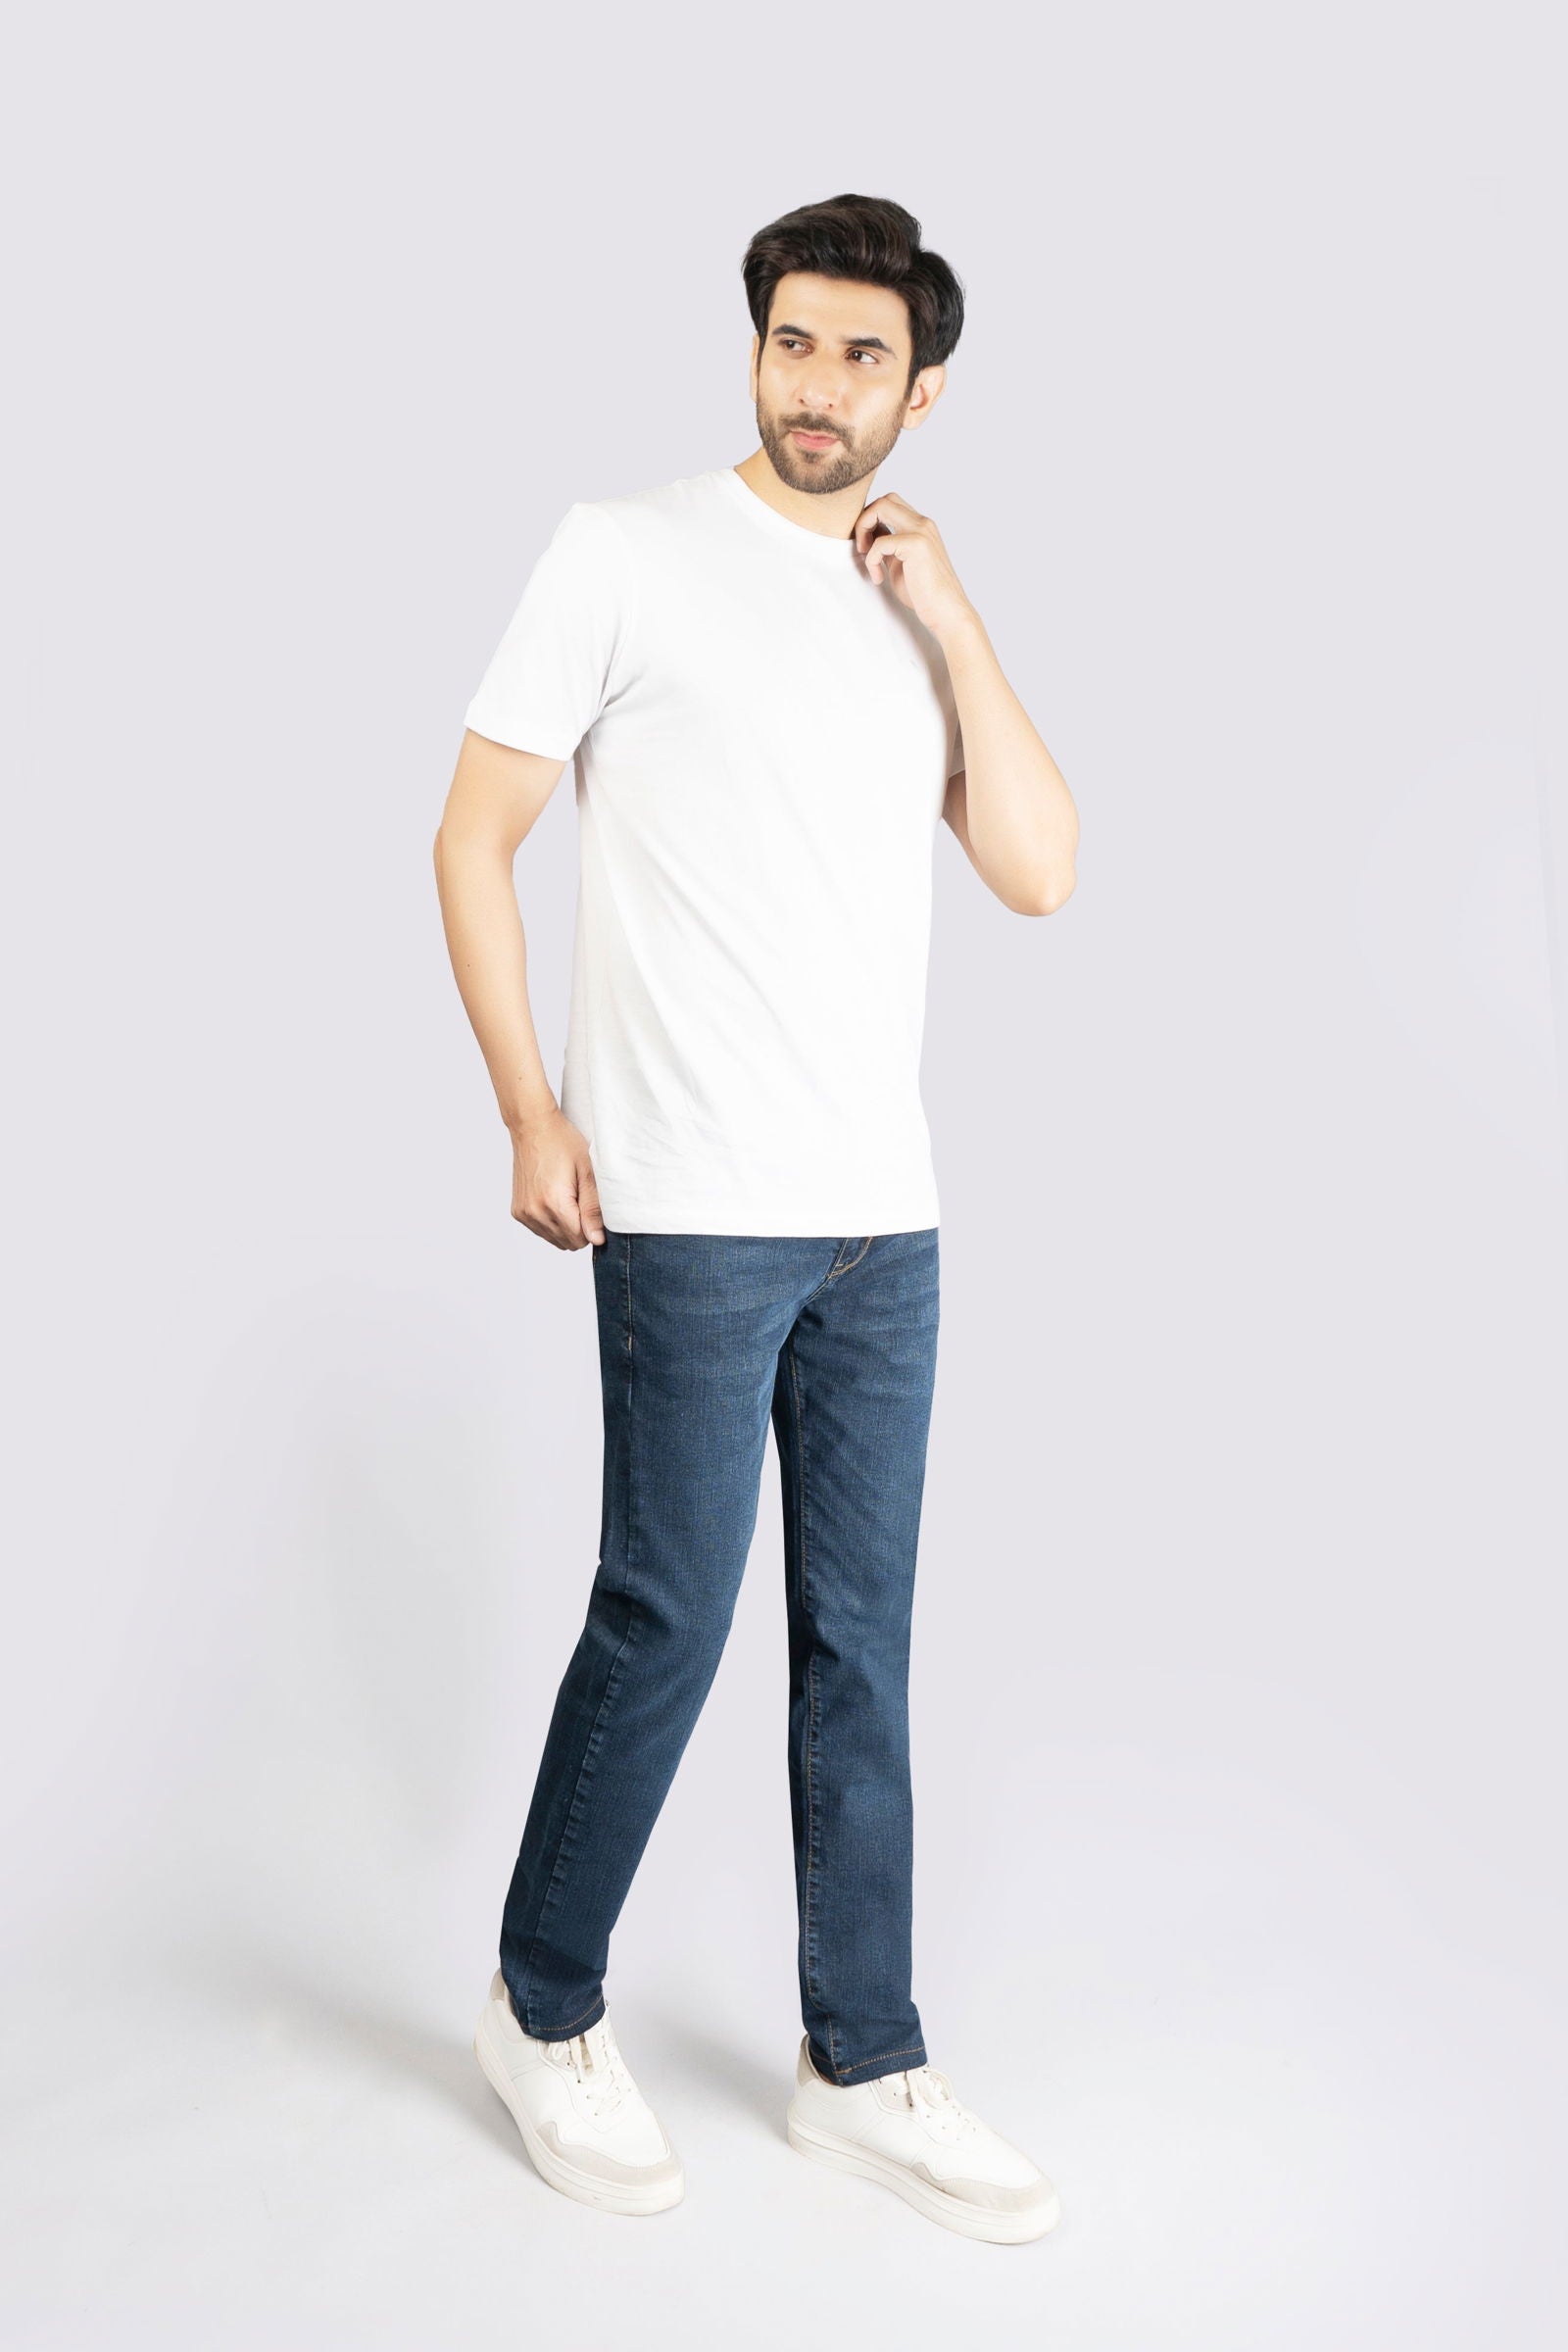 Power Stretch Denim Dark Blue Jeans - The Axis Clothing